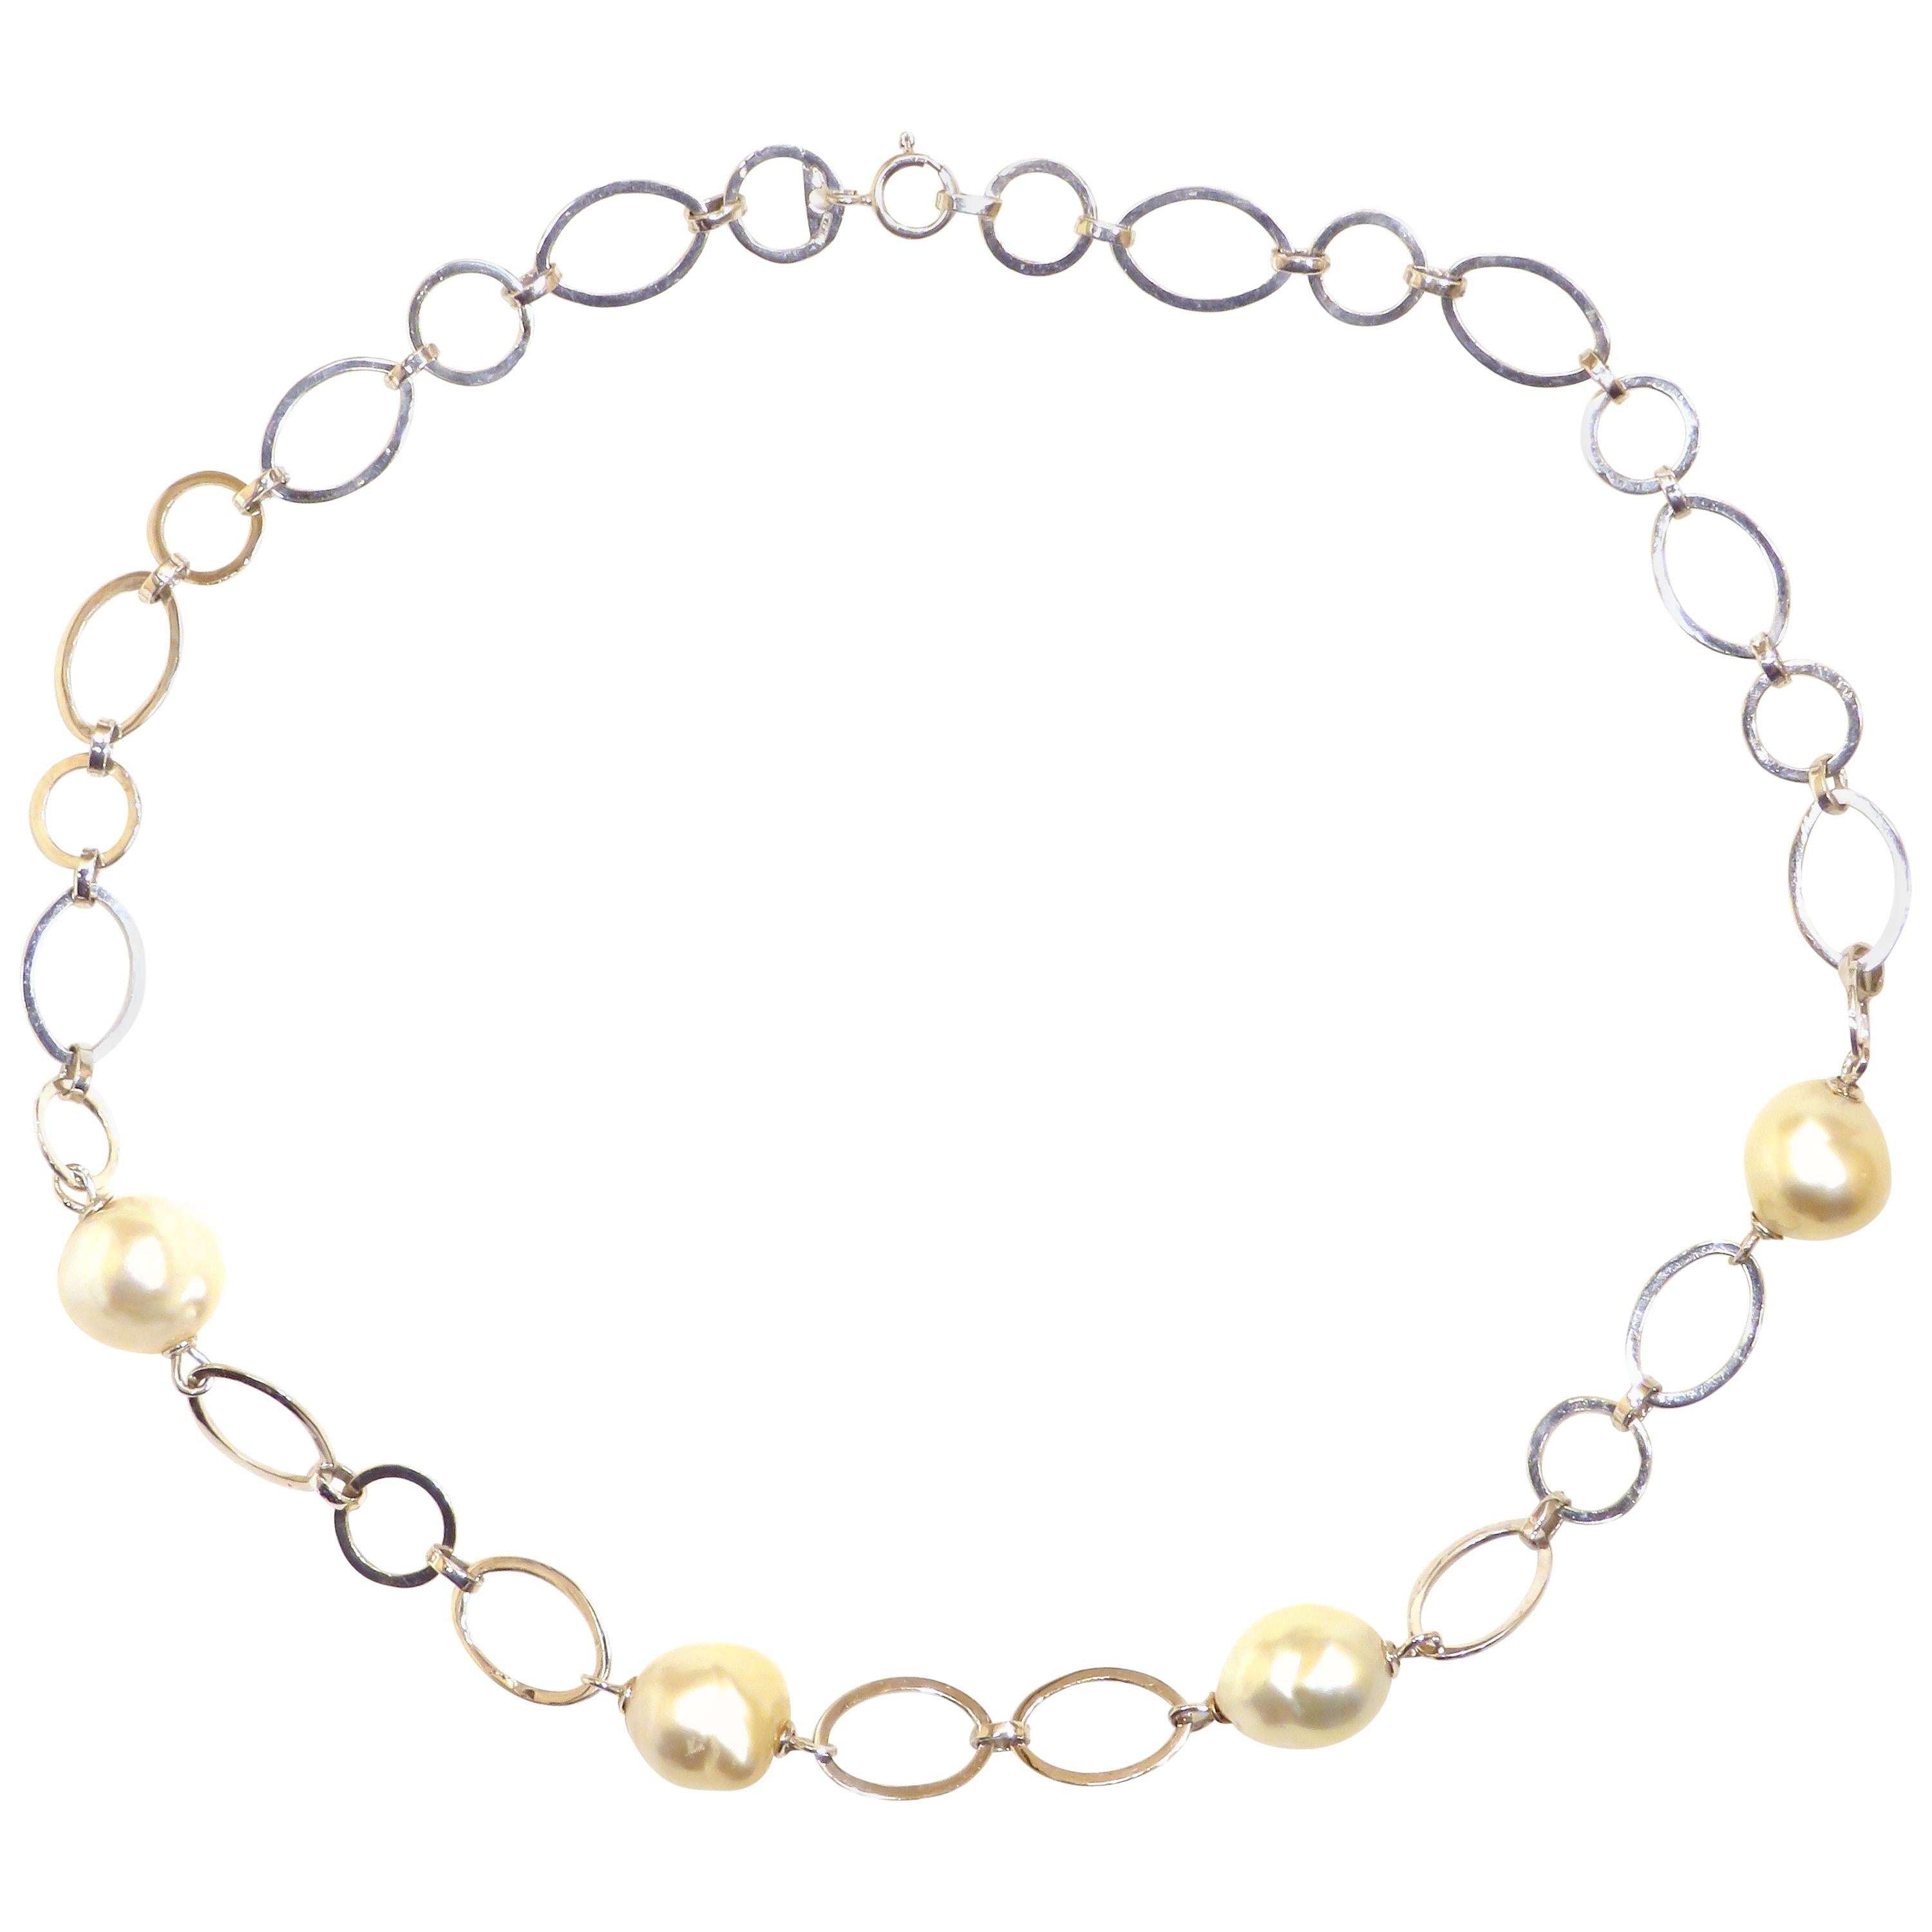 Australian Pearls White Gold Necklace Handcrafted in Italy by Botta Gioielli For Sale